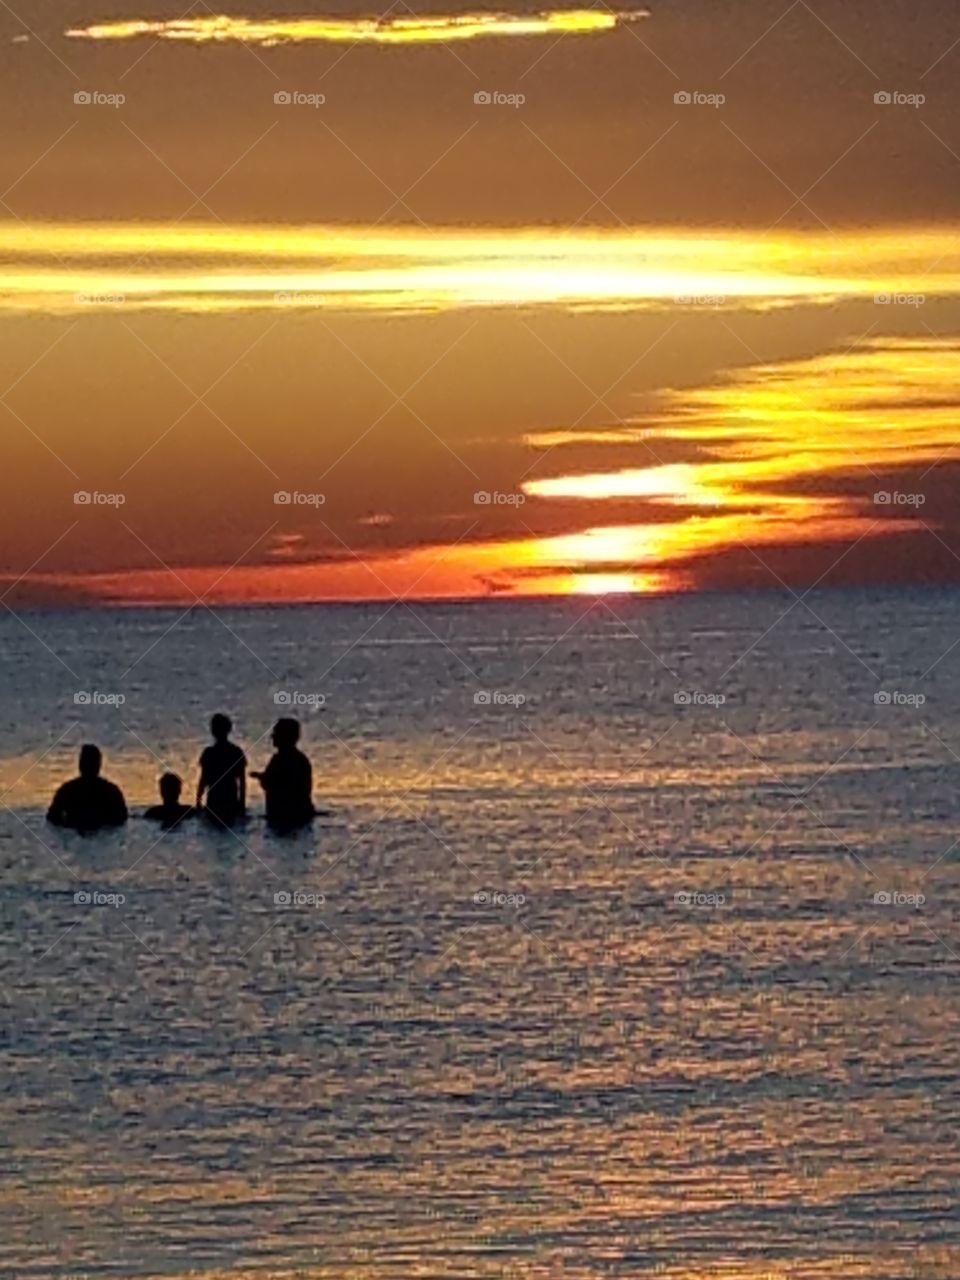 sunset on Clearwater Beach